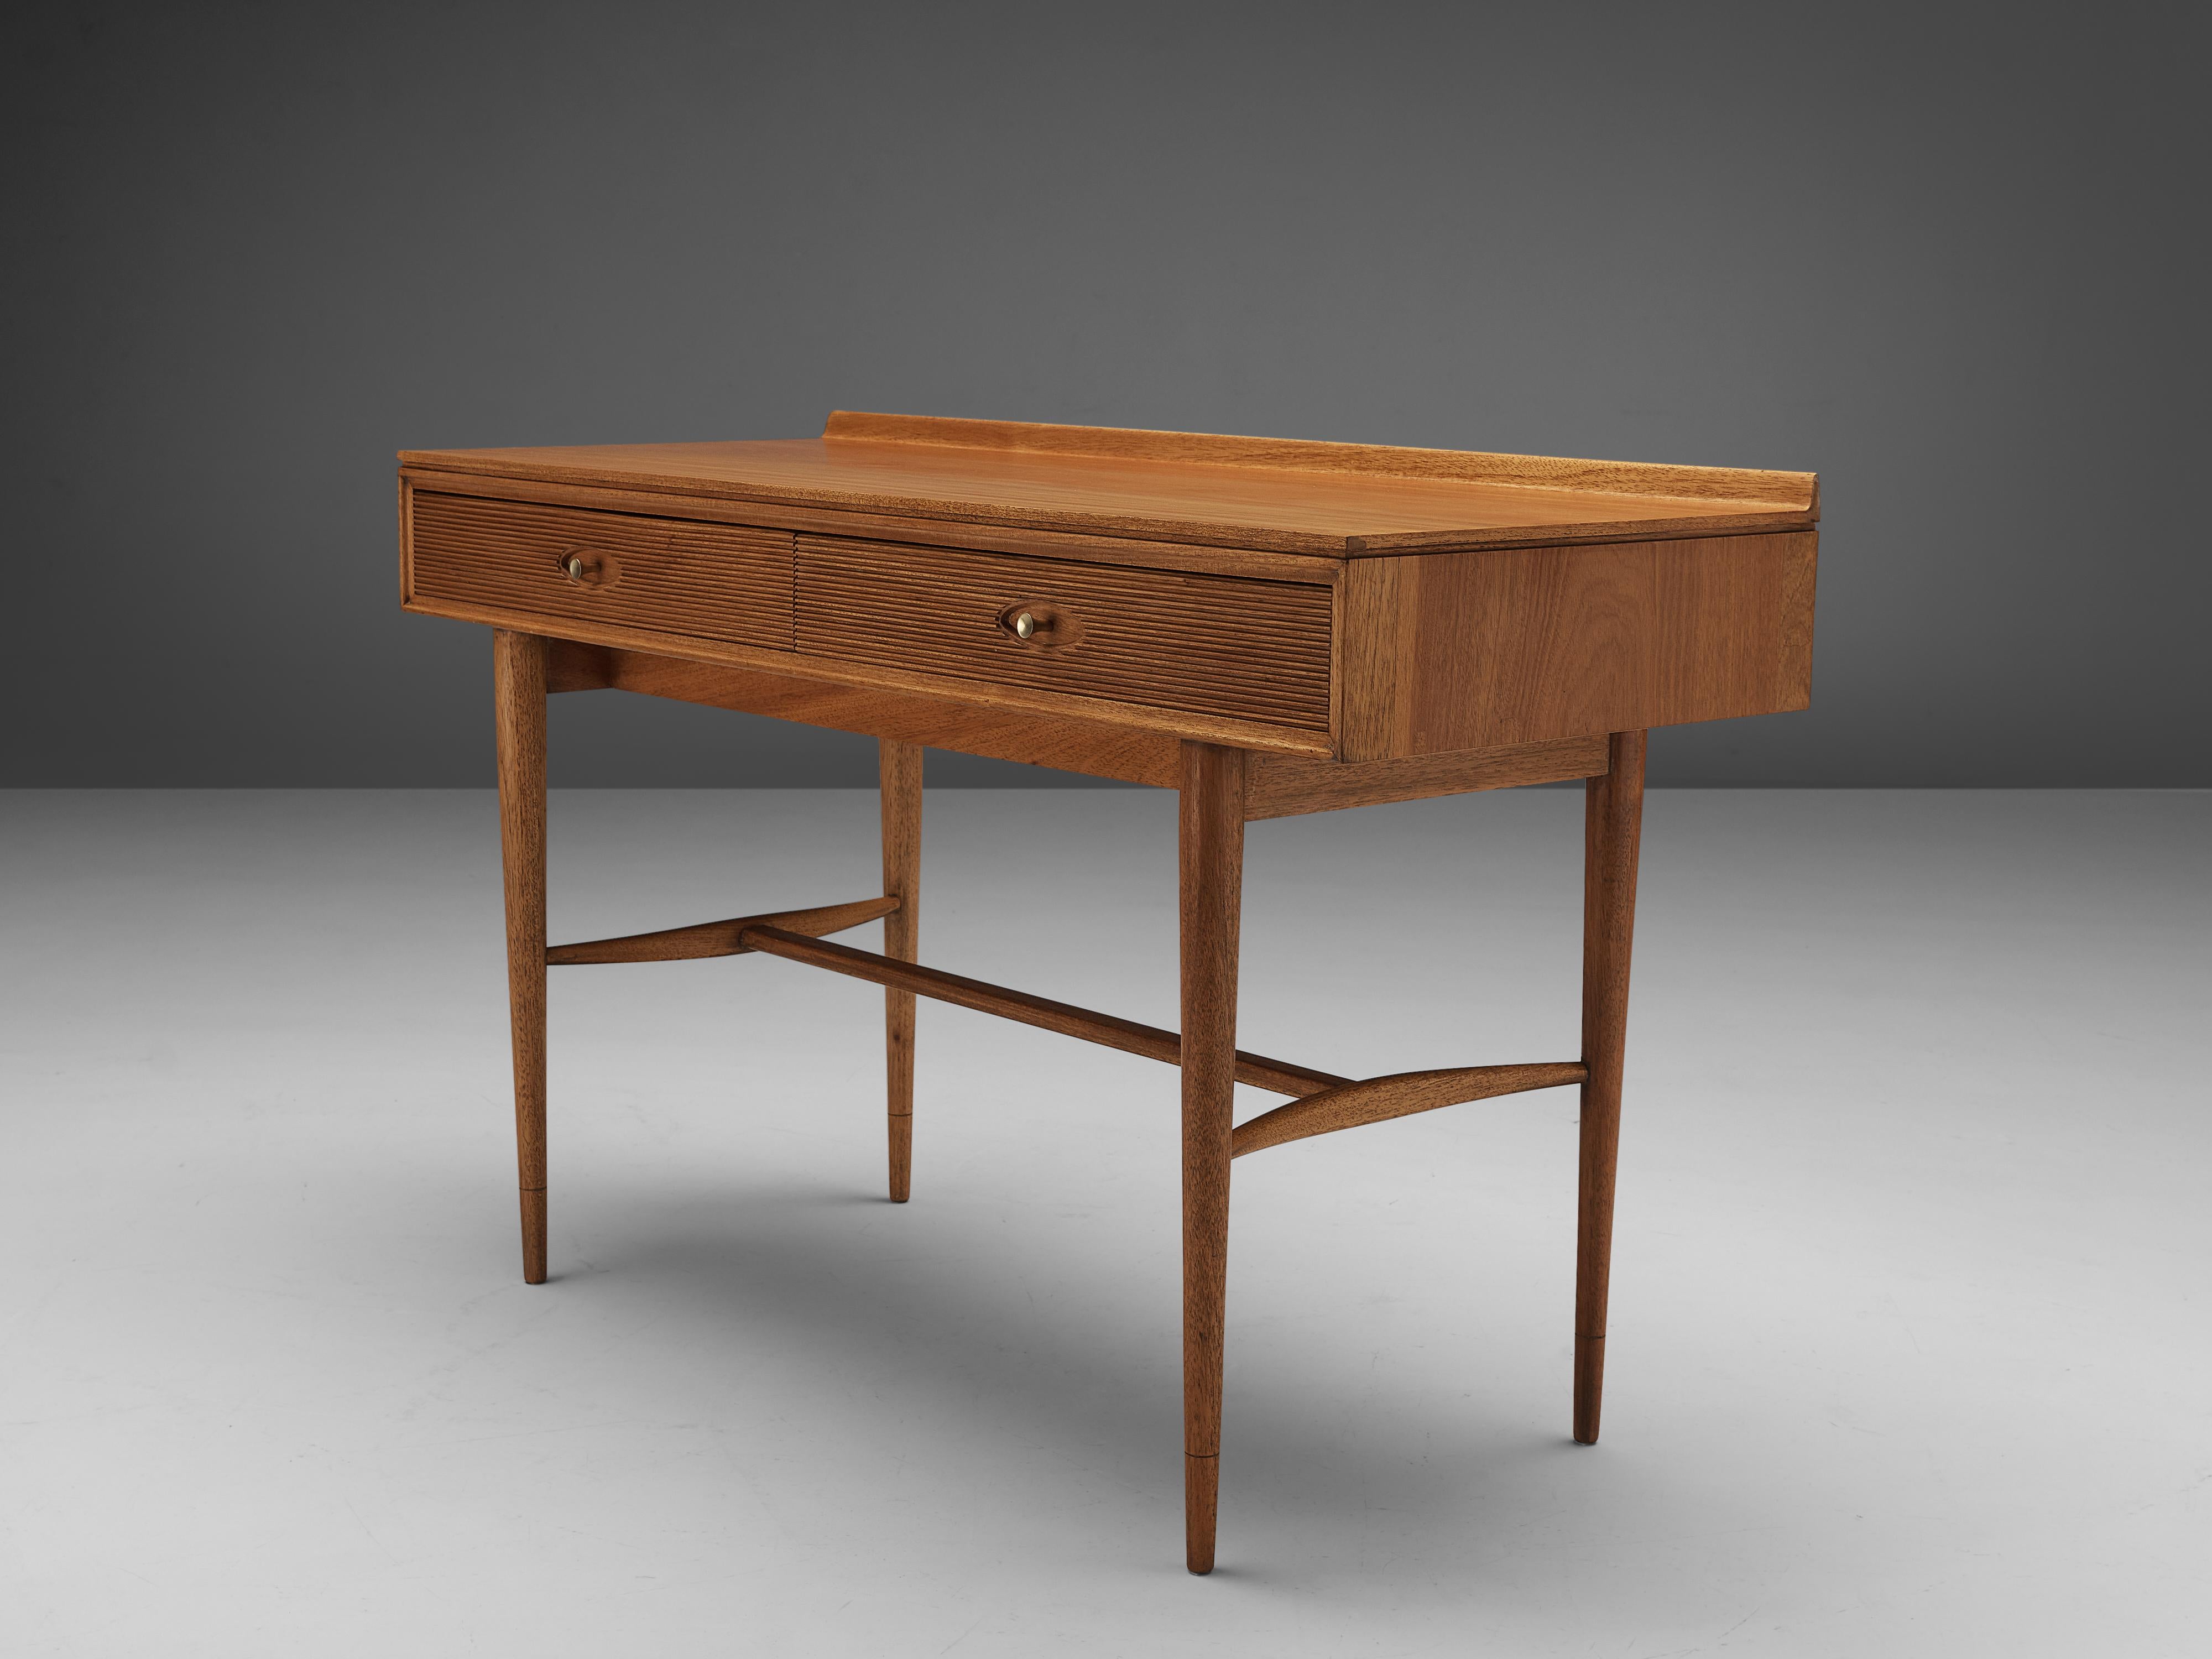 British Robert Heritage Desk with Drawers in Satinwood and Brass